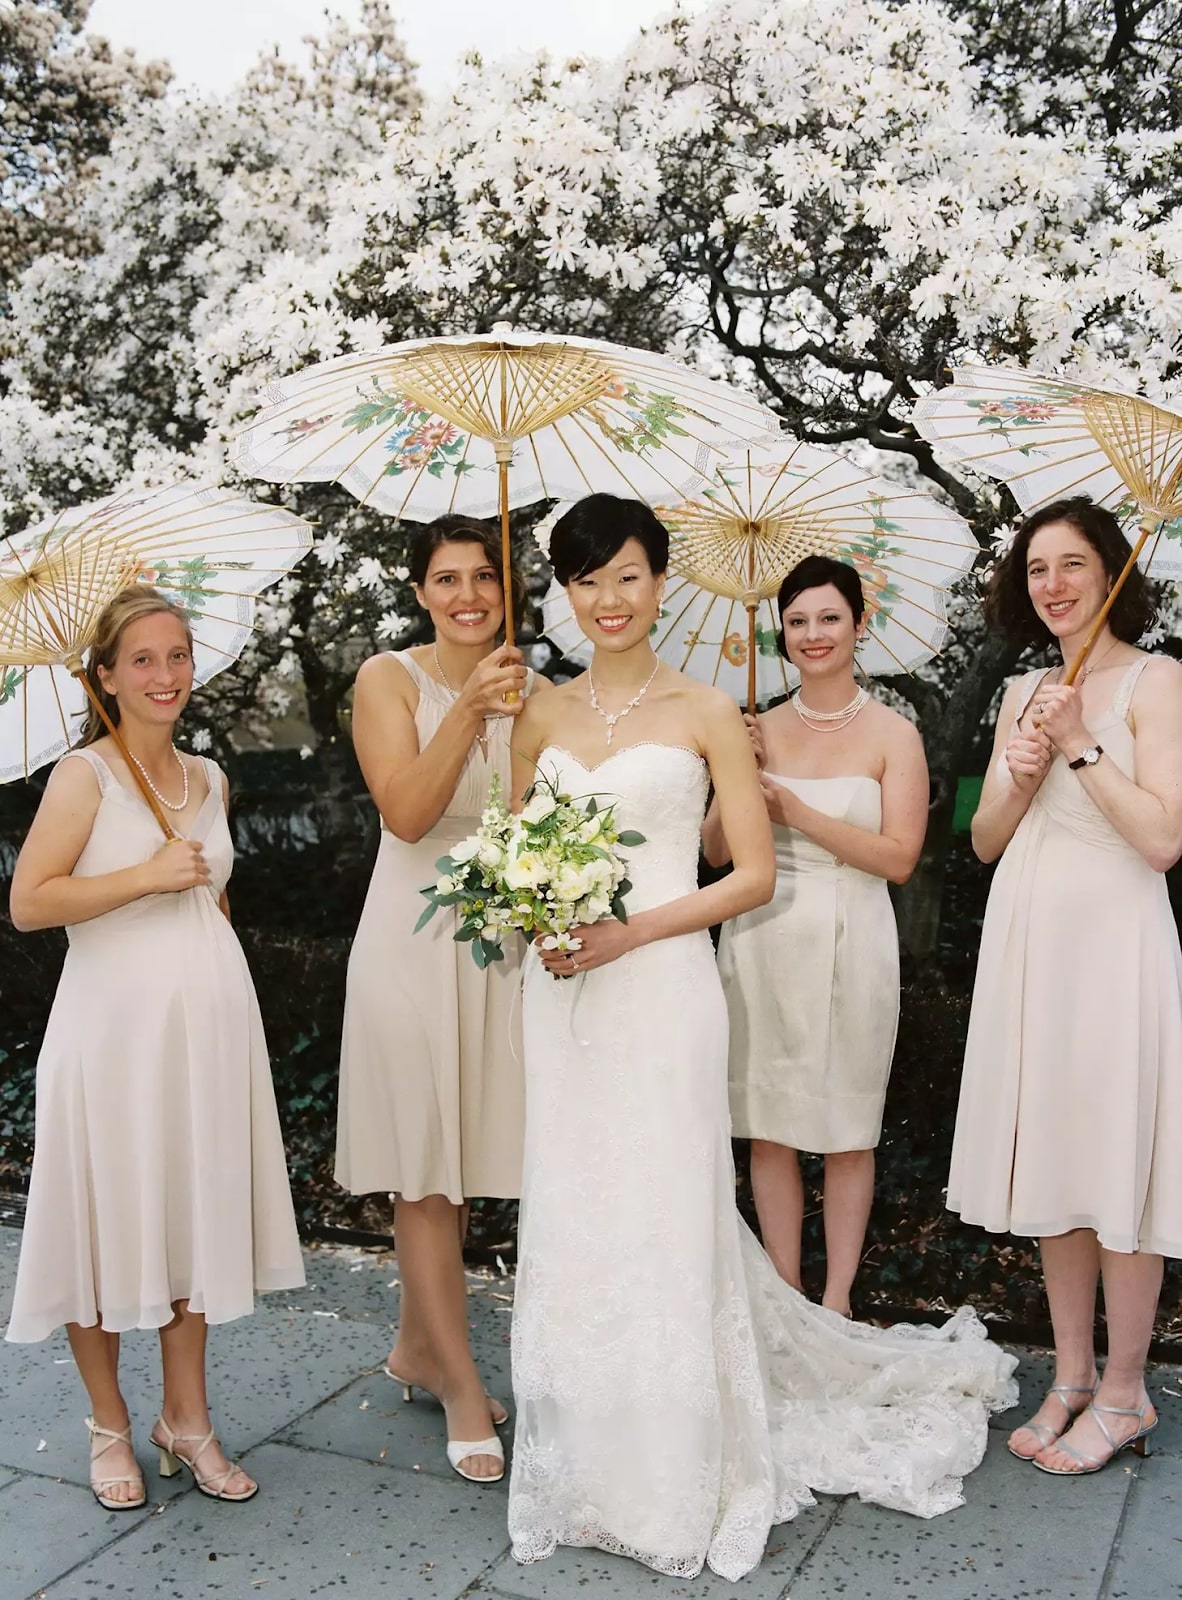 Any garden party wouldn’t be complete without the perfect parasol to shade you from the sun. We think the same should be said about any garden venue wedding